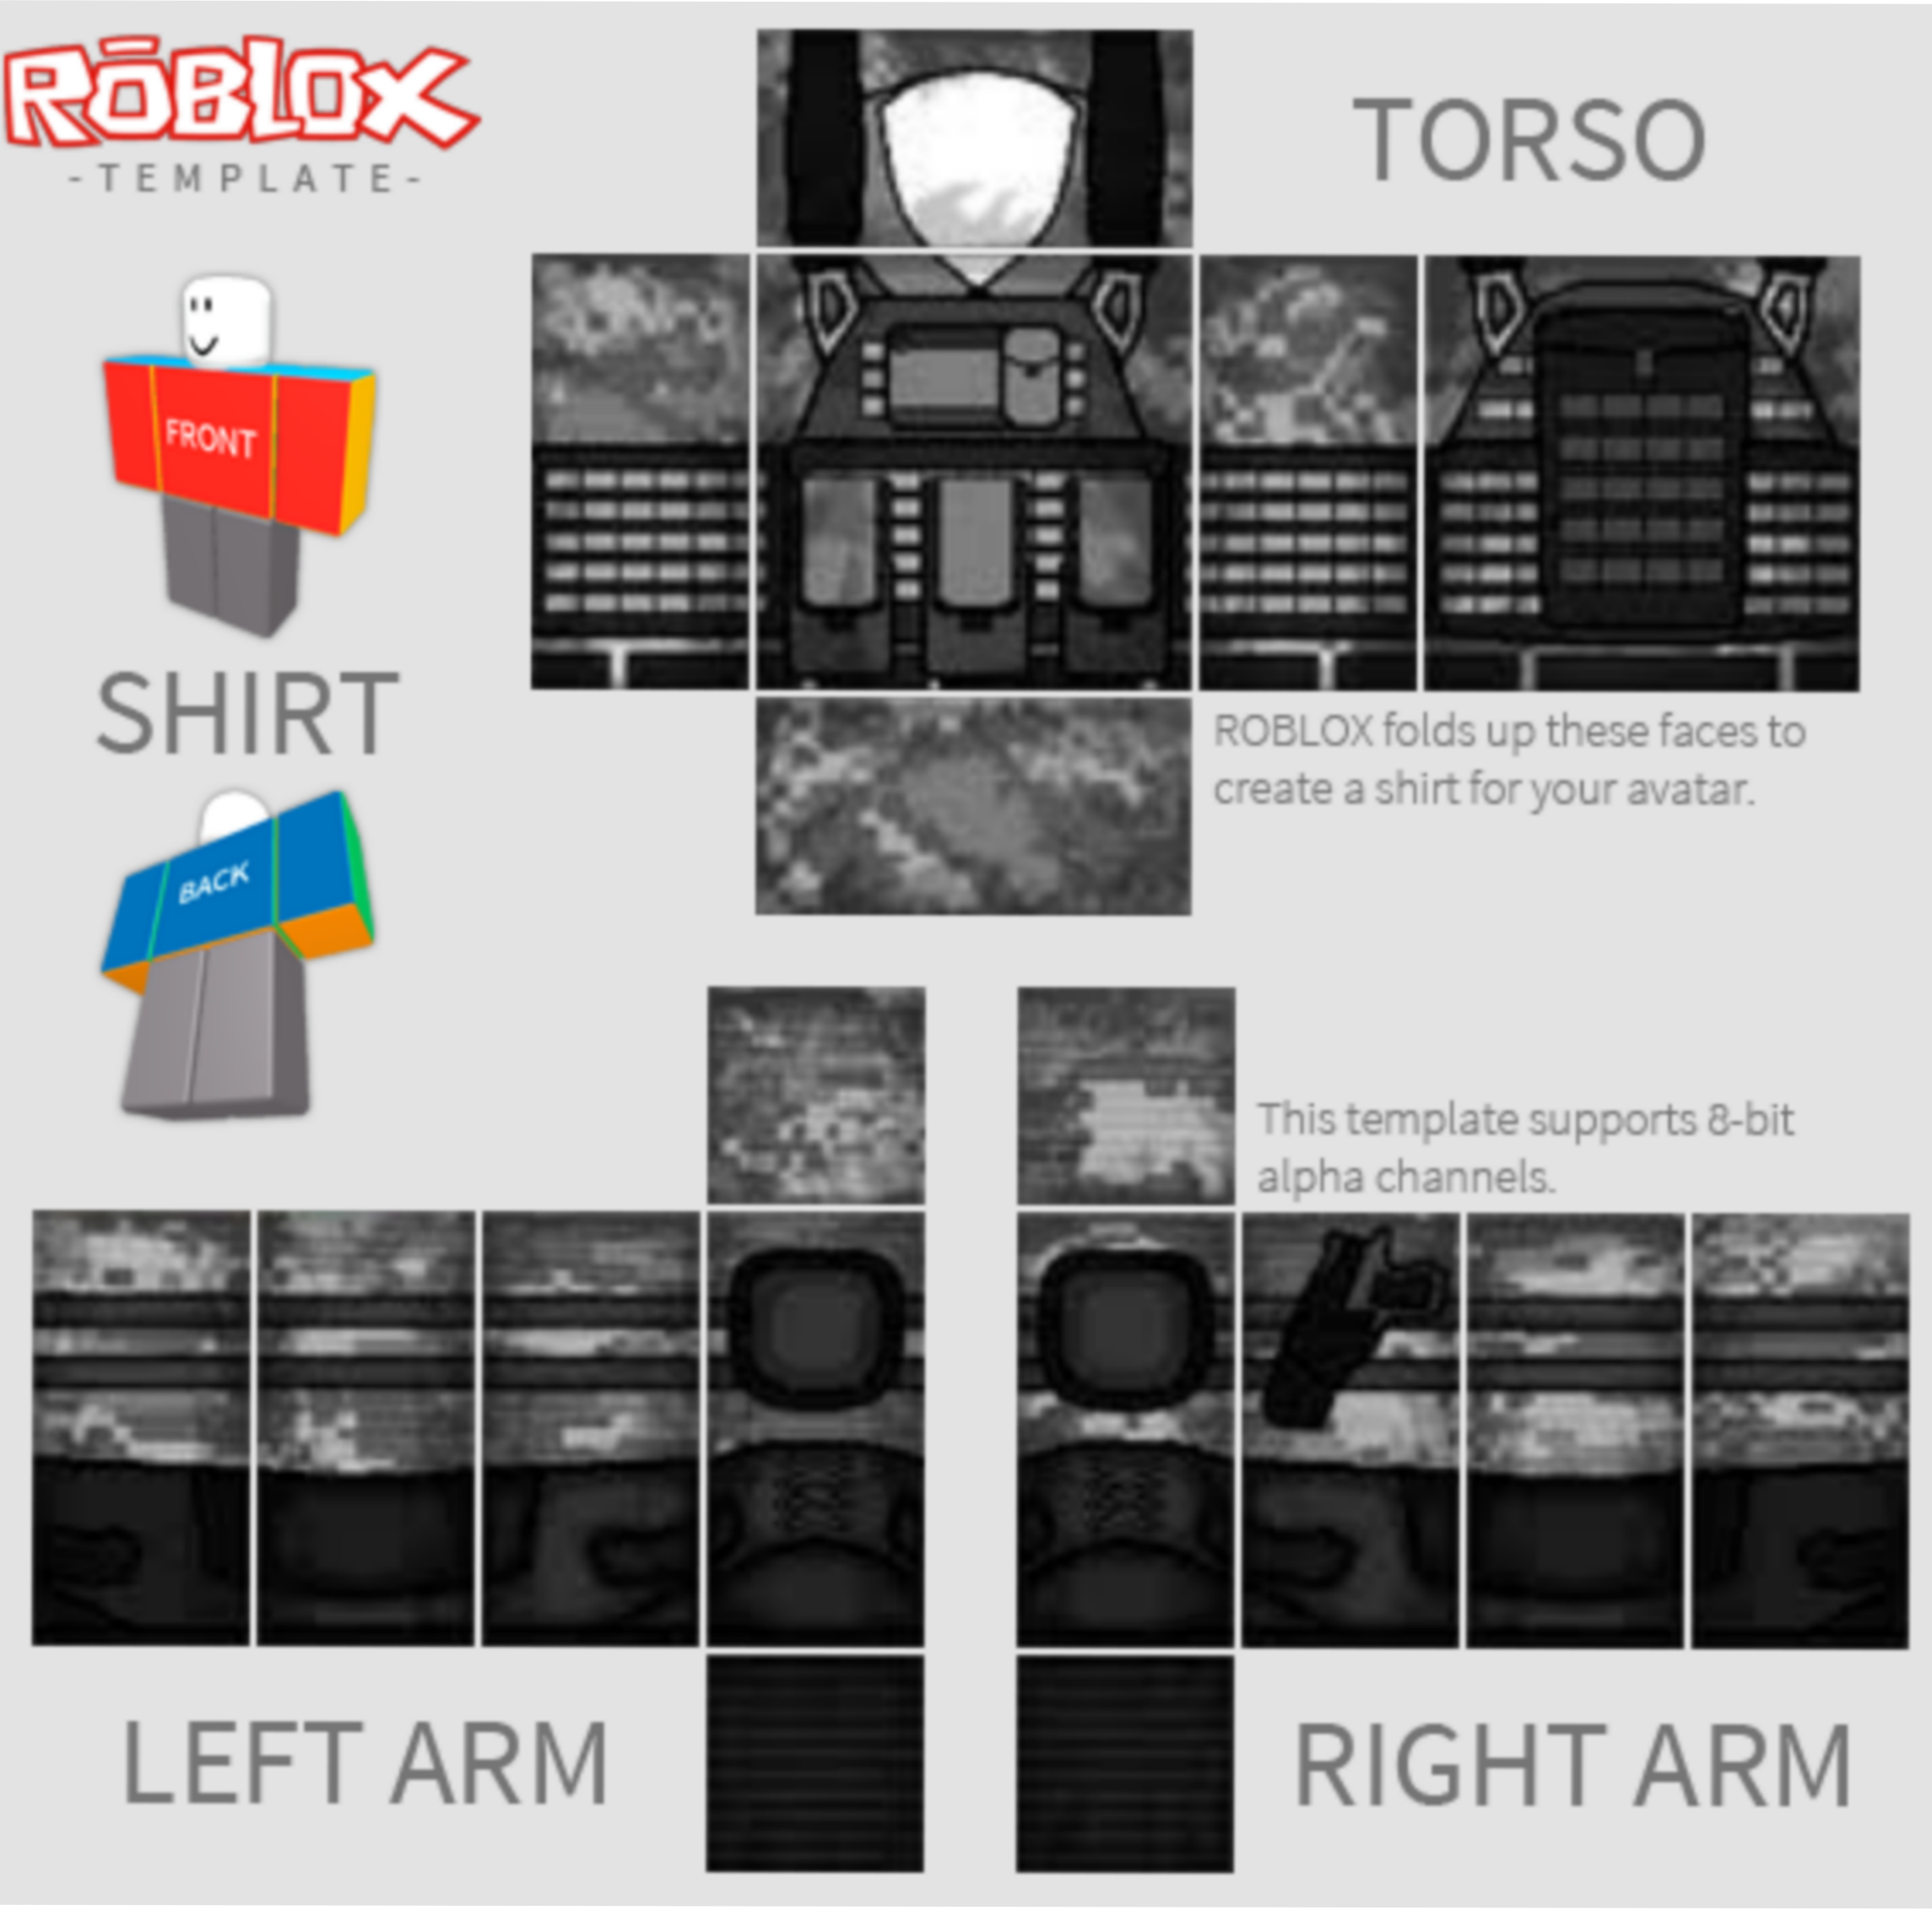 Roblox Template Swat Shirt Image By Guicorreia13795 - roblox shirt template swat